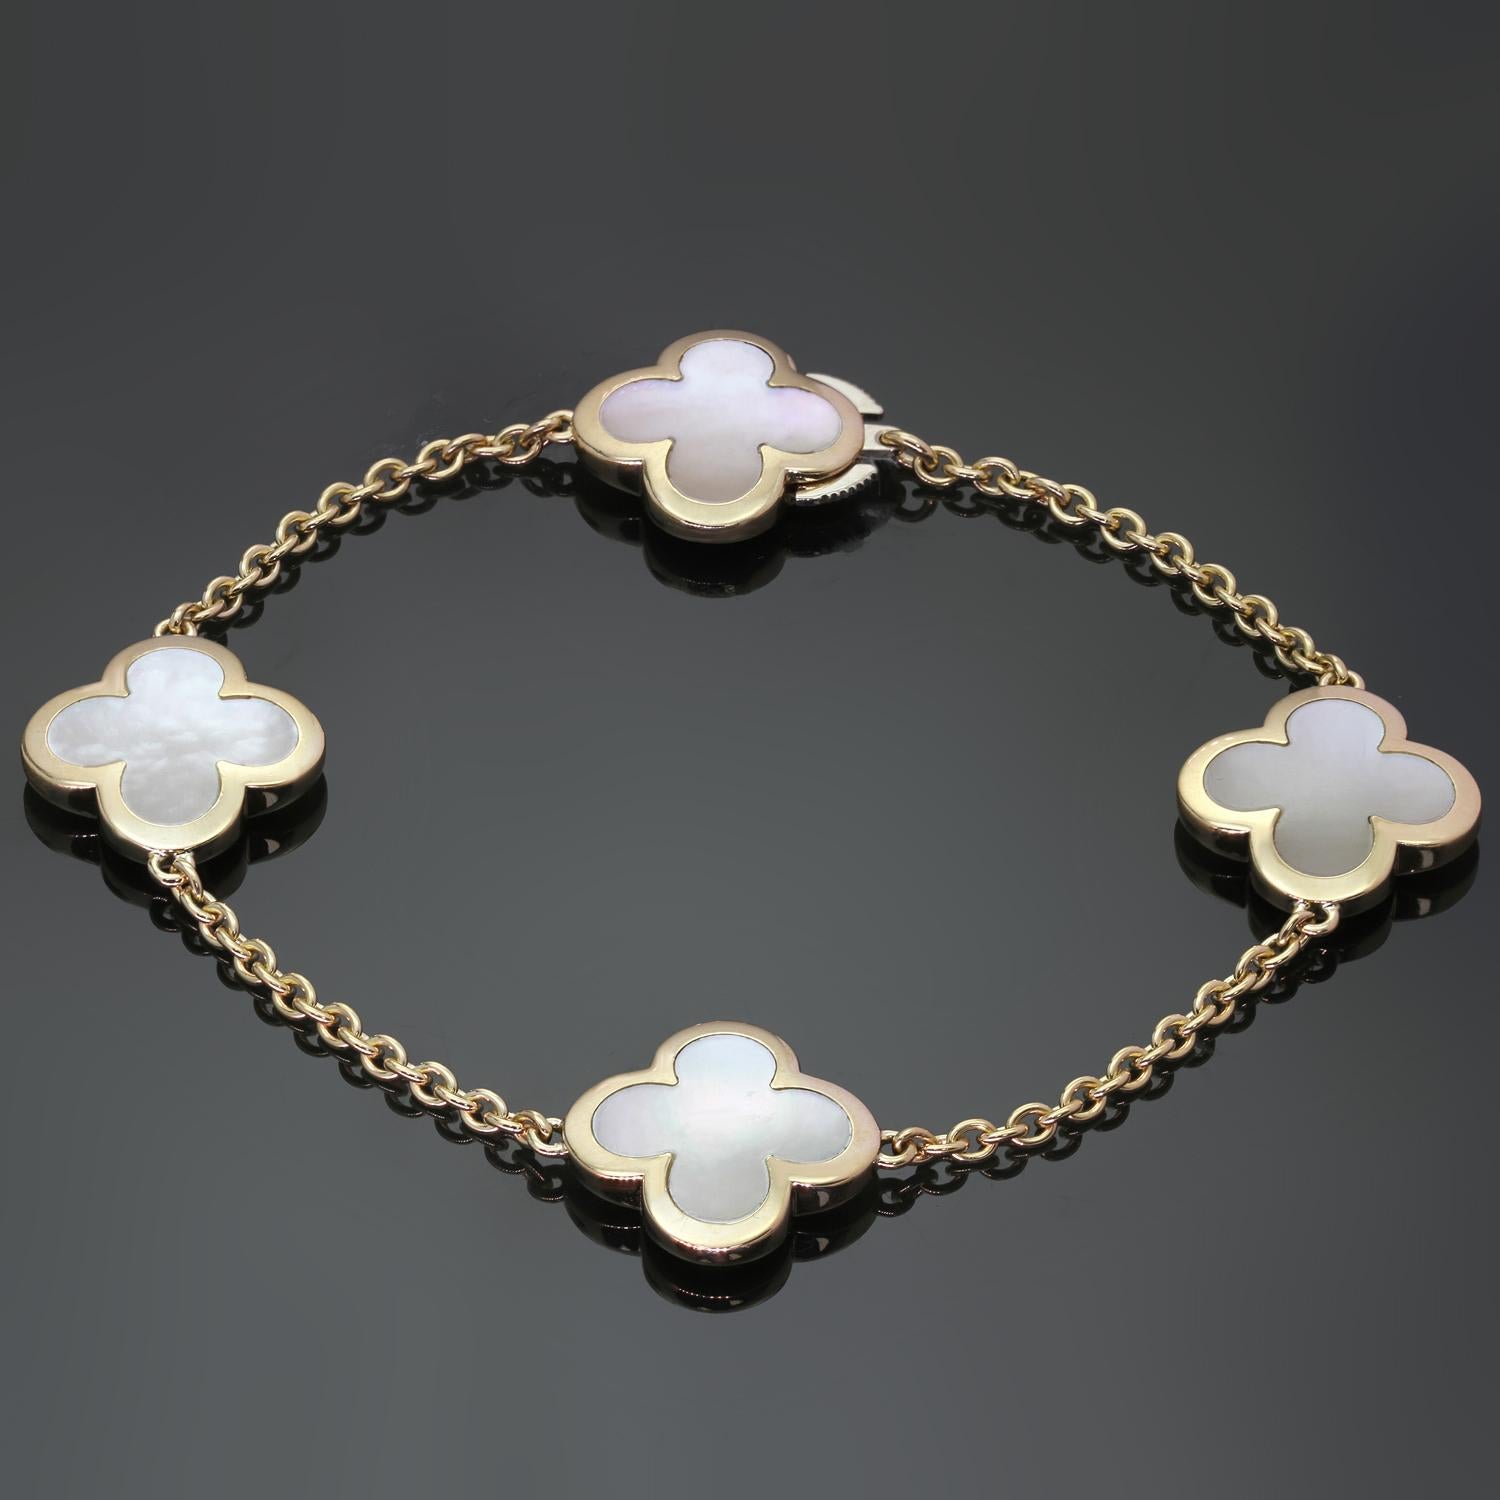 This fabulous Van Cleef & Arpels bracelet from the Pure Alhambra collection is crafted in 18k yellow gold and features 4 lucky clover motifs inlaid with mother-of-pearl. Completed with a concealed clasp. Made in France circa 2010s. Measurements: